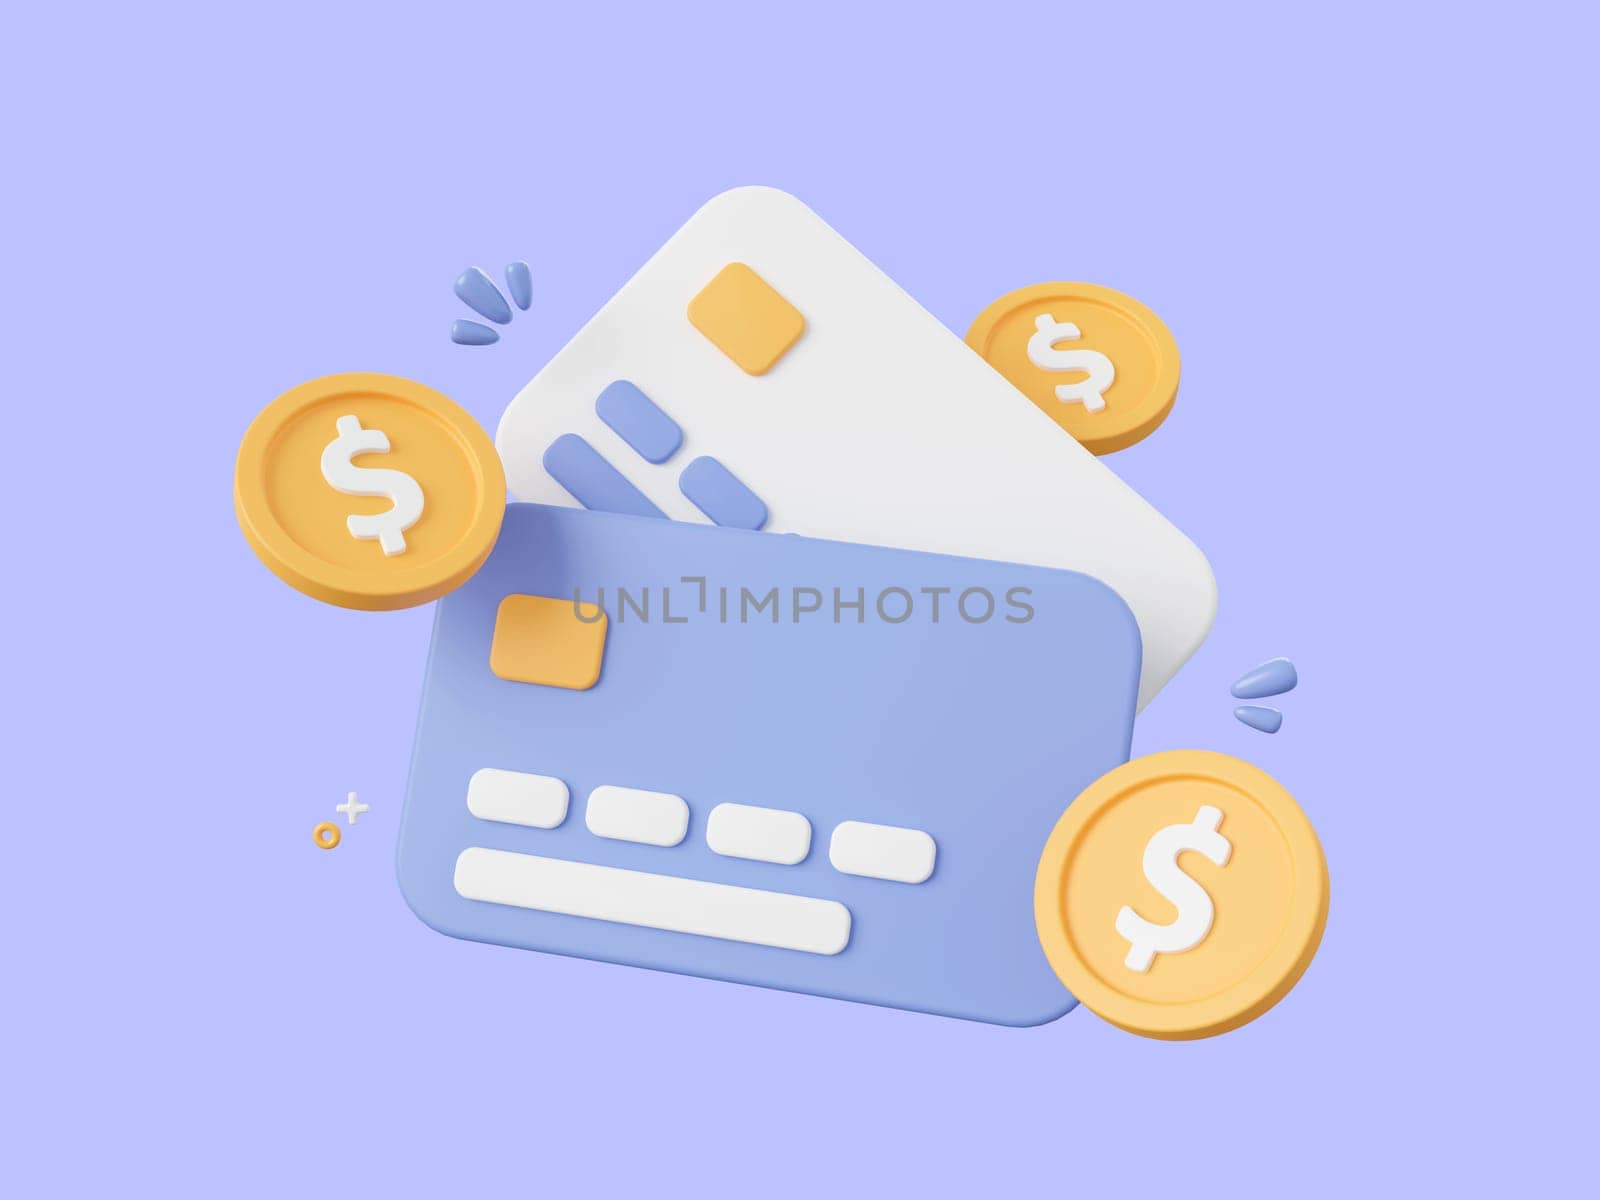 3d cartoon design illustration of Credit cards with dollar coin, Payments by credit card.